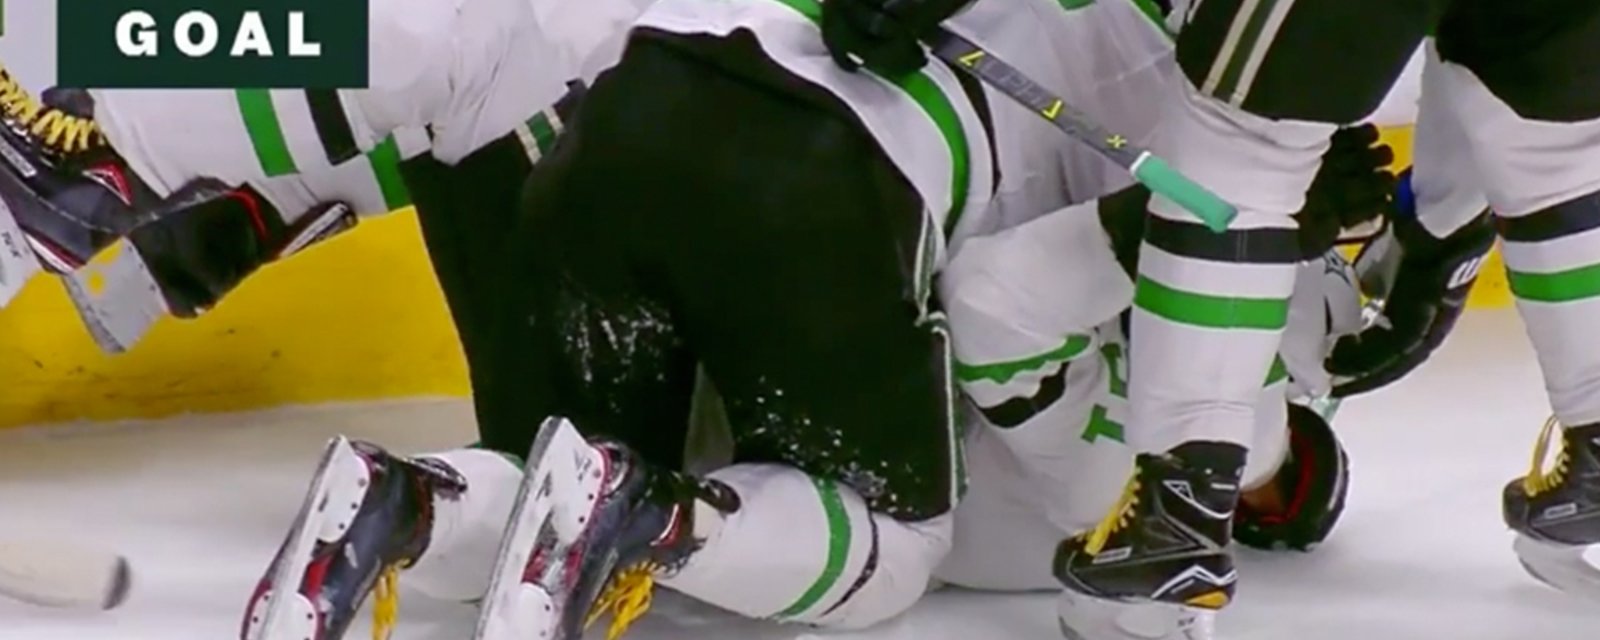 Seguin scores and gets decked by teammate Radulov